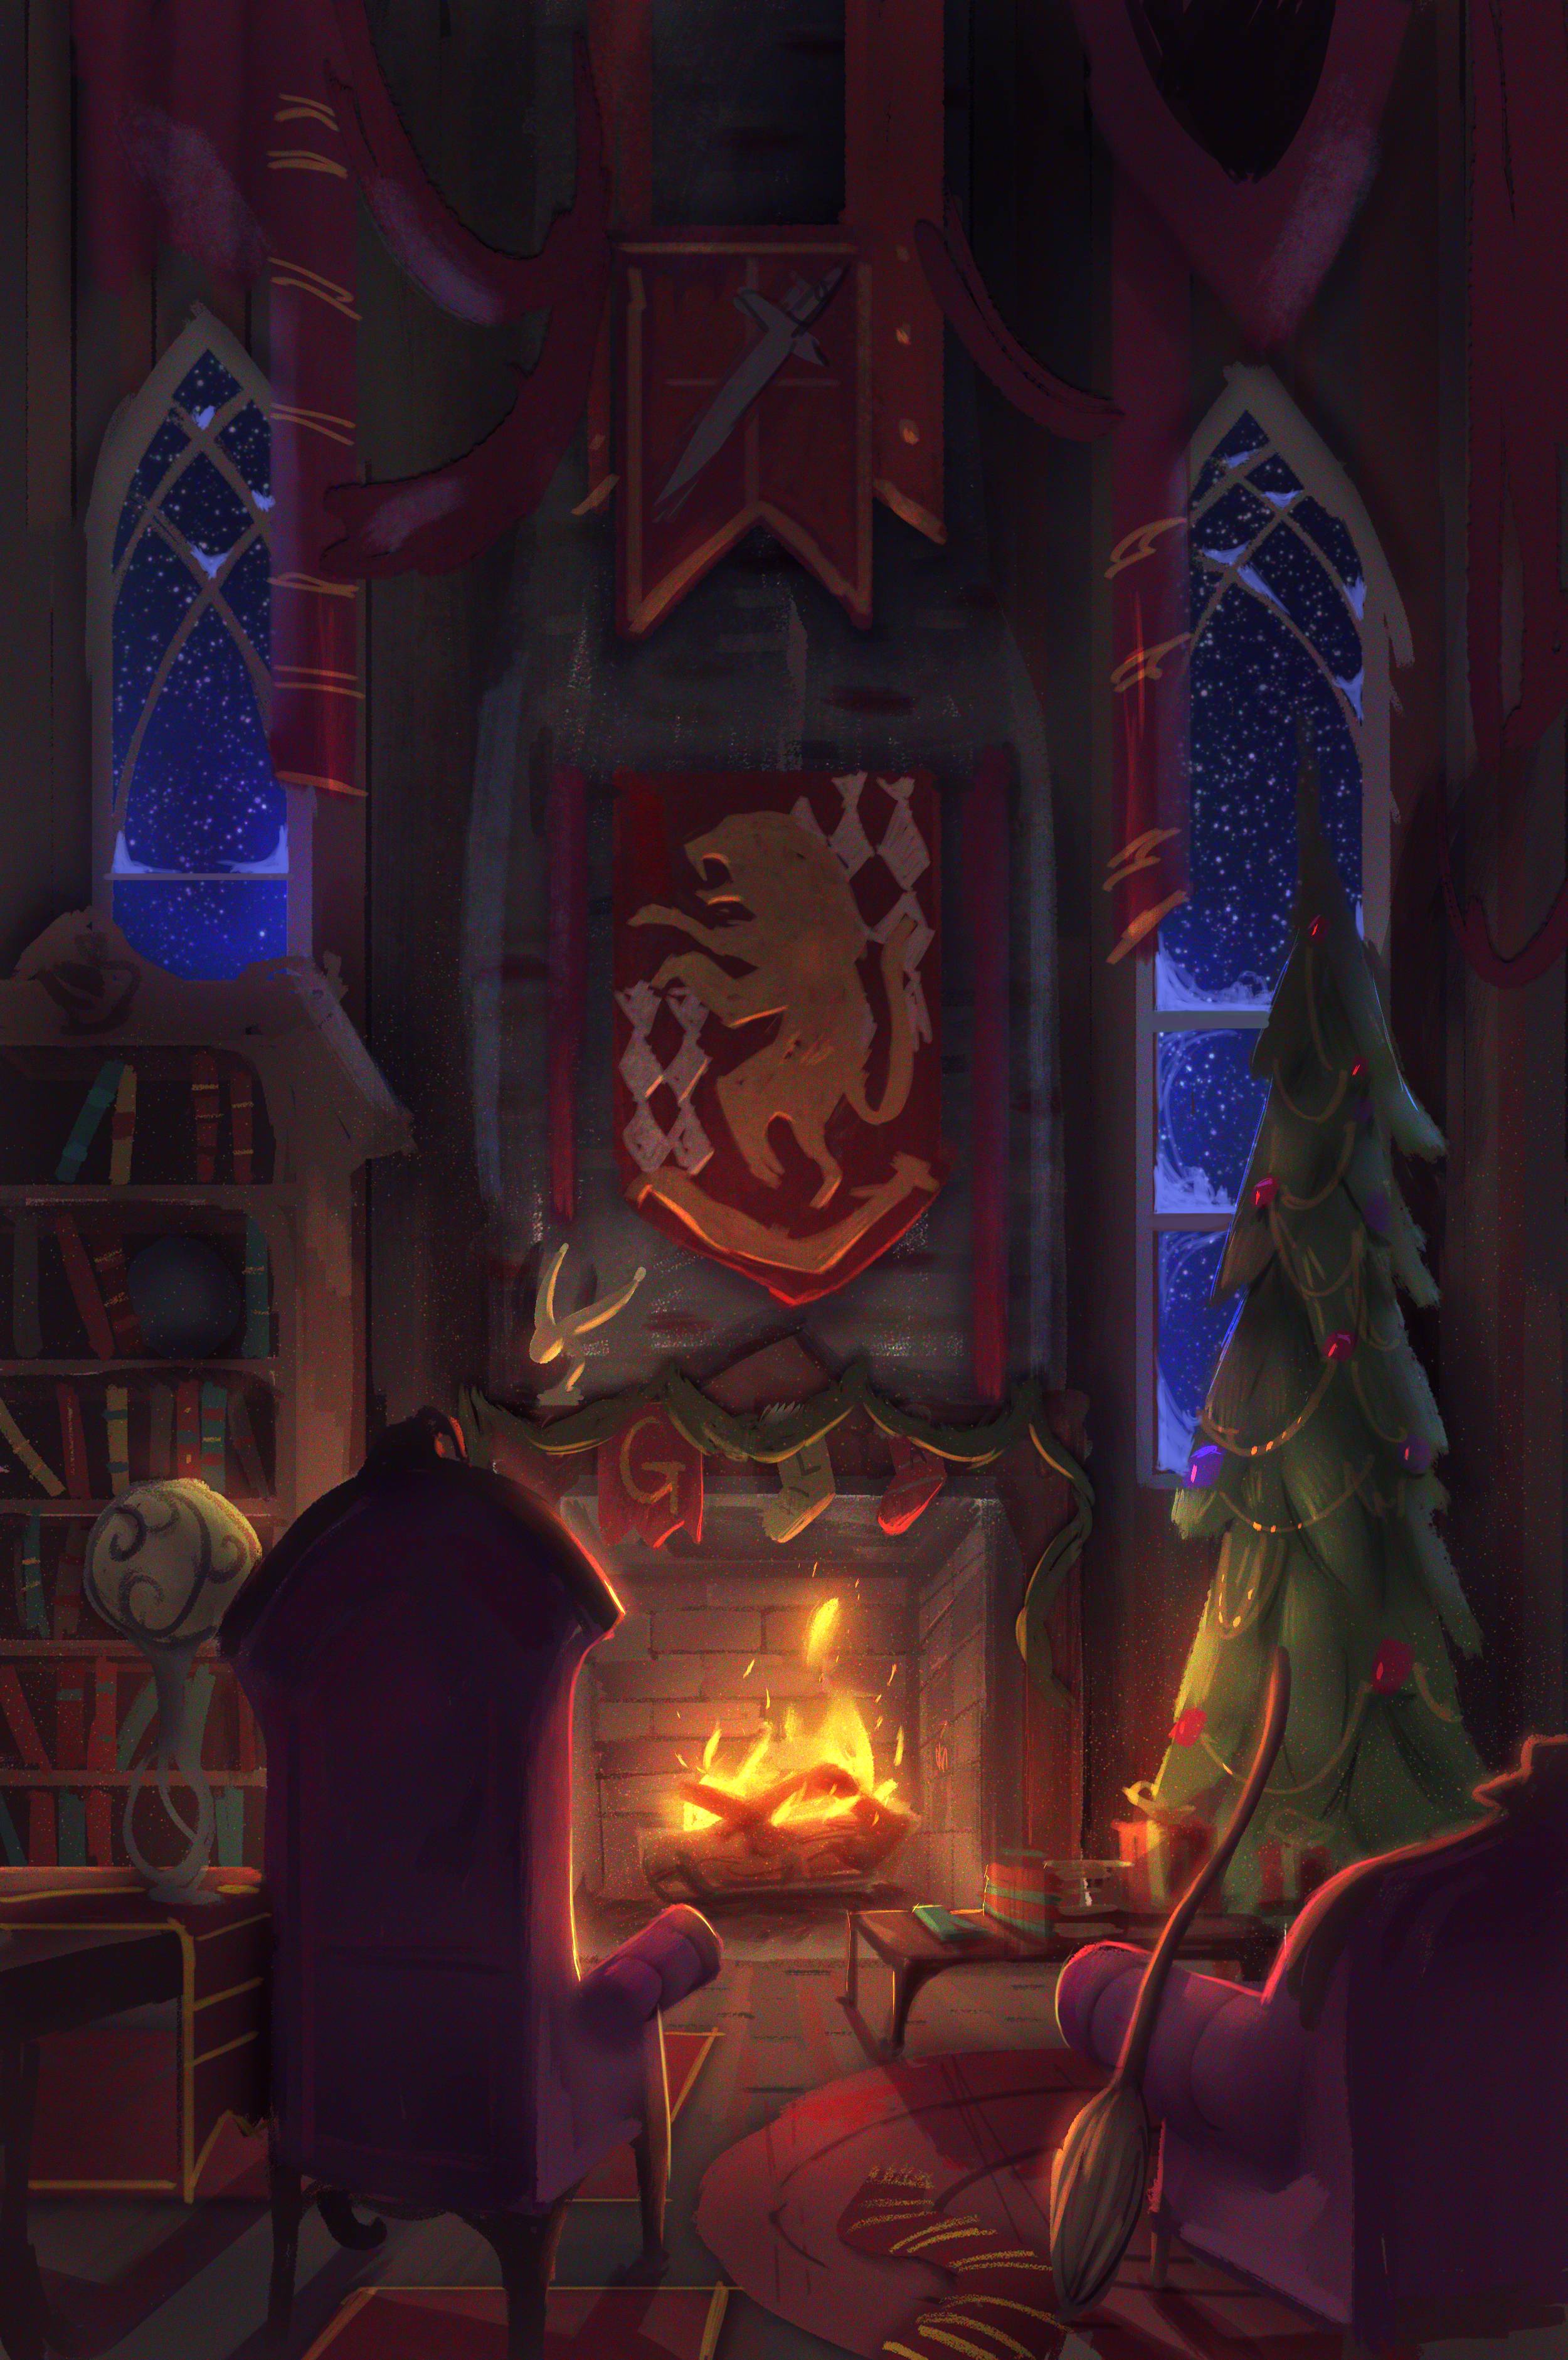 I painted the Gyffindor common room during Christmastime